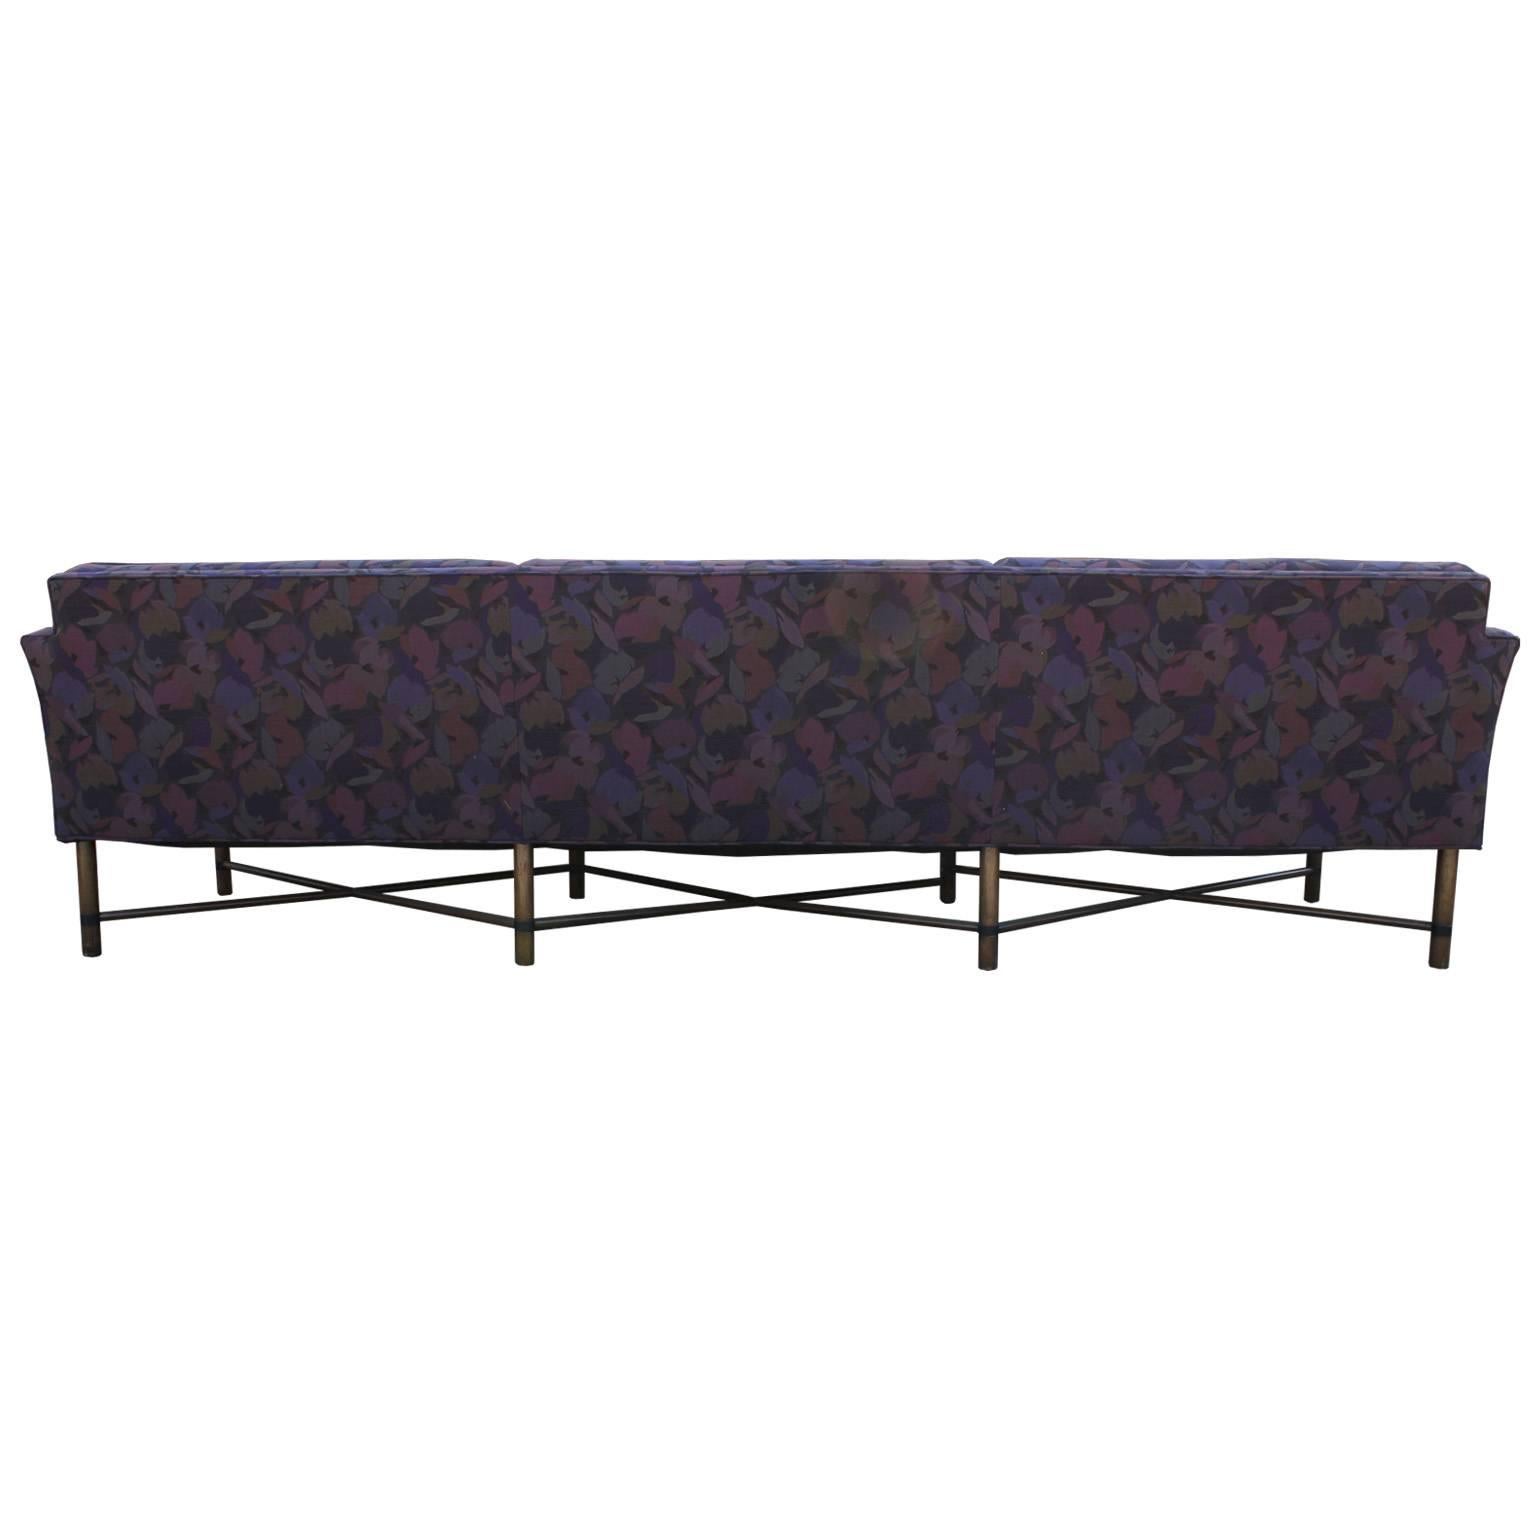 American Harvey Probber Seating Group Vintage Modern Sofa and Loveseat in Purple Floral